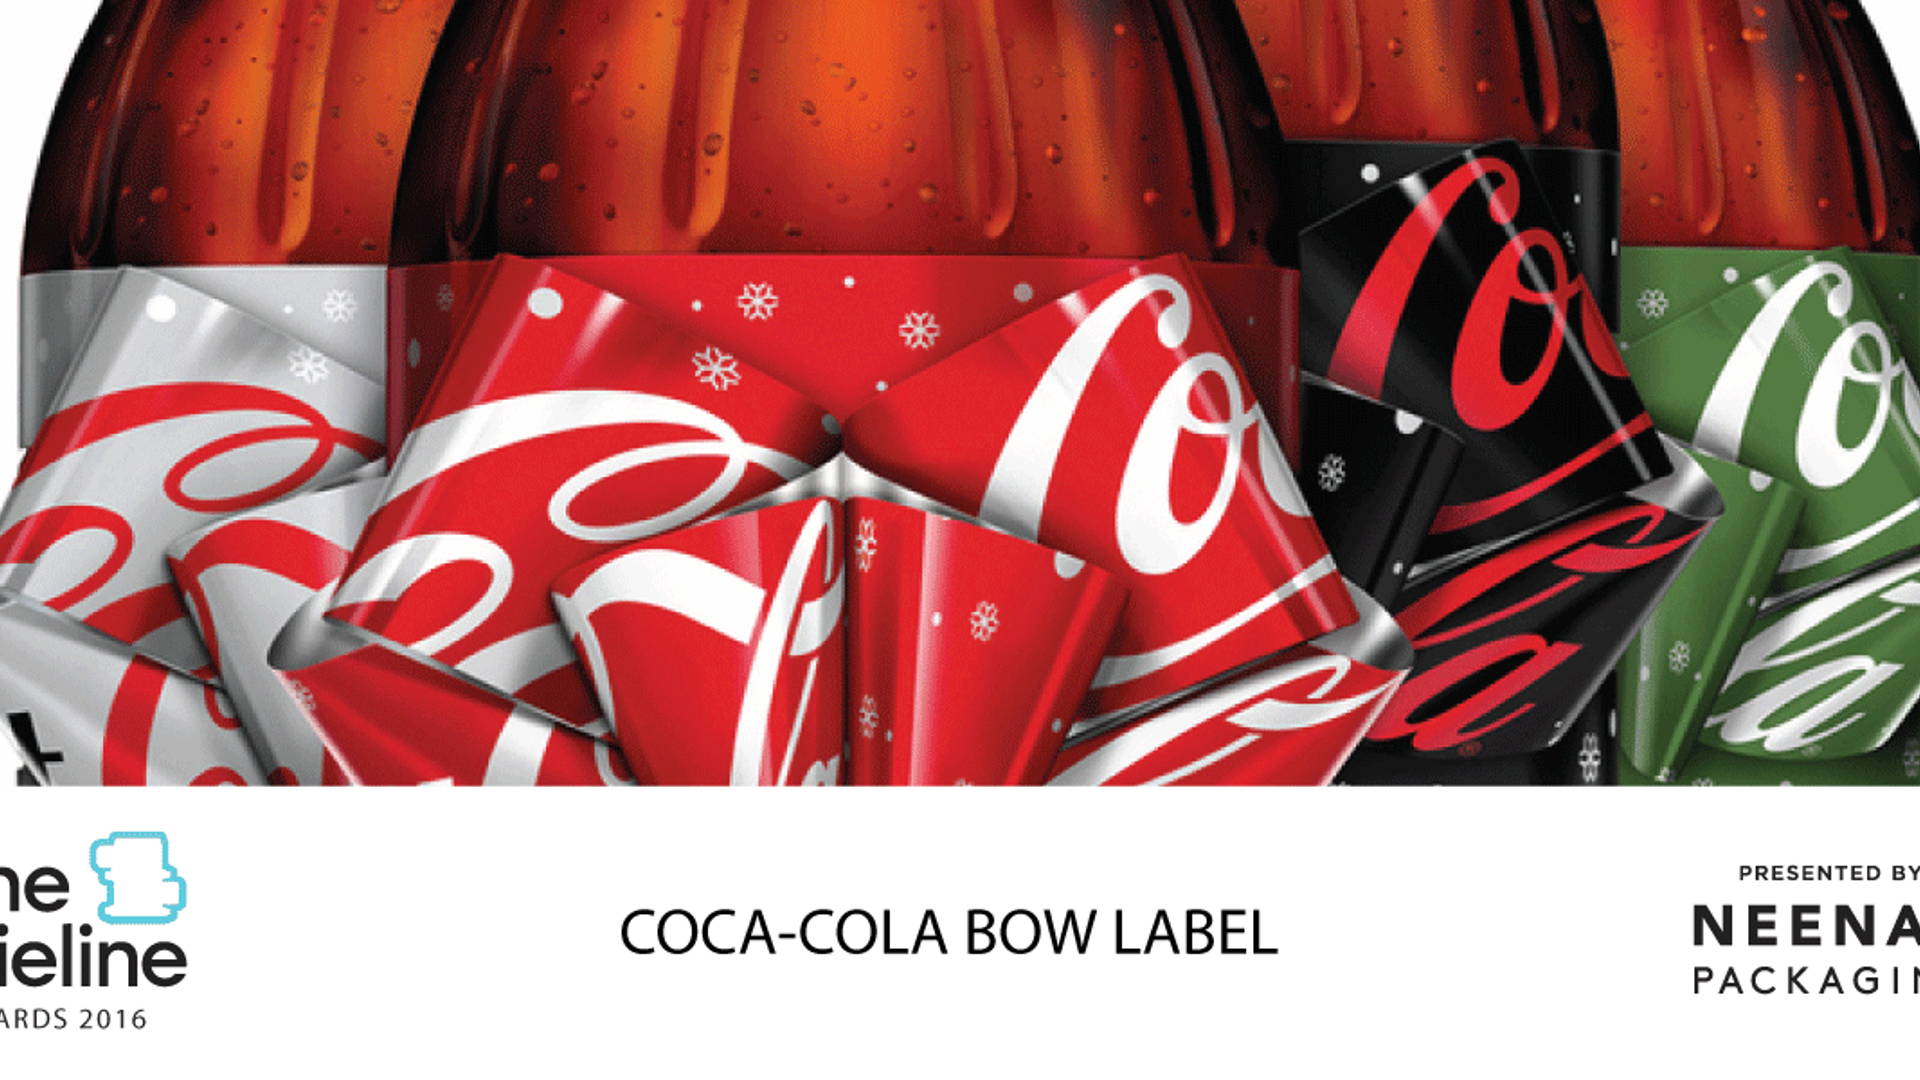 Featured image for The Dieline Awards 2016 Outstanding Achievements: Coca-Cola Bow label